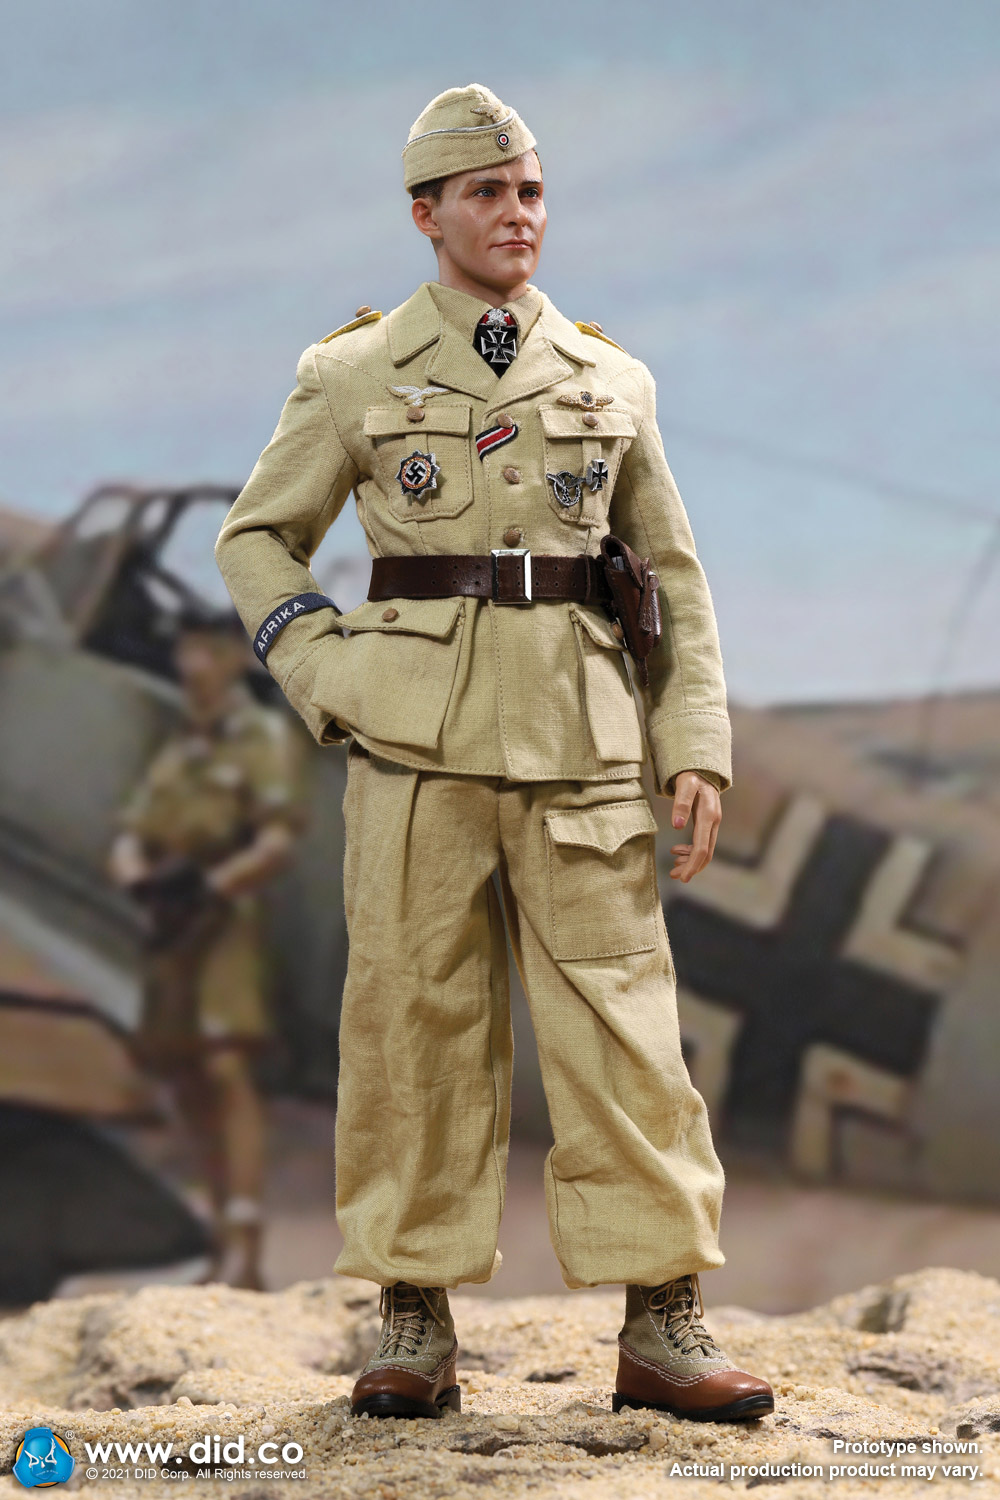 NEW PRODUCT: D80154 WWII German Luftwaffe Flying Ace “Star Of Africa” – Hans-Joachim Marseille & E60060  Diorama Of “Star Of Africa” 14321